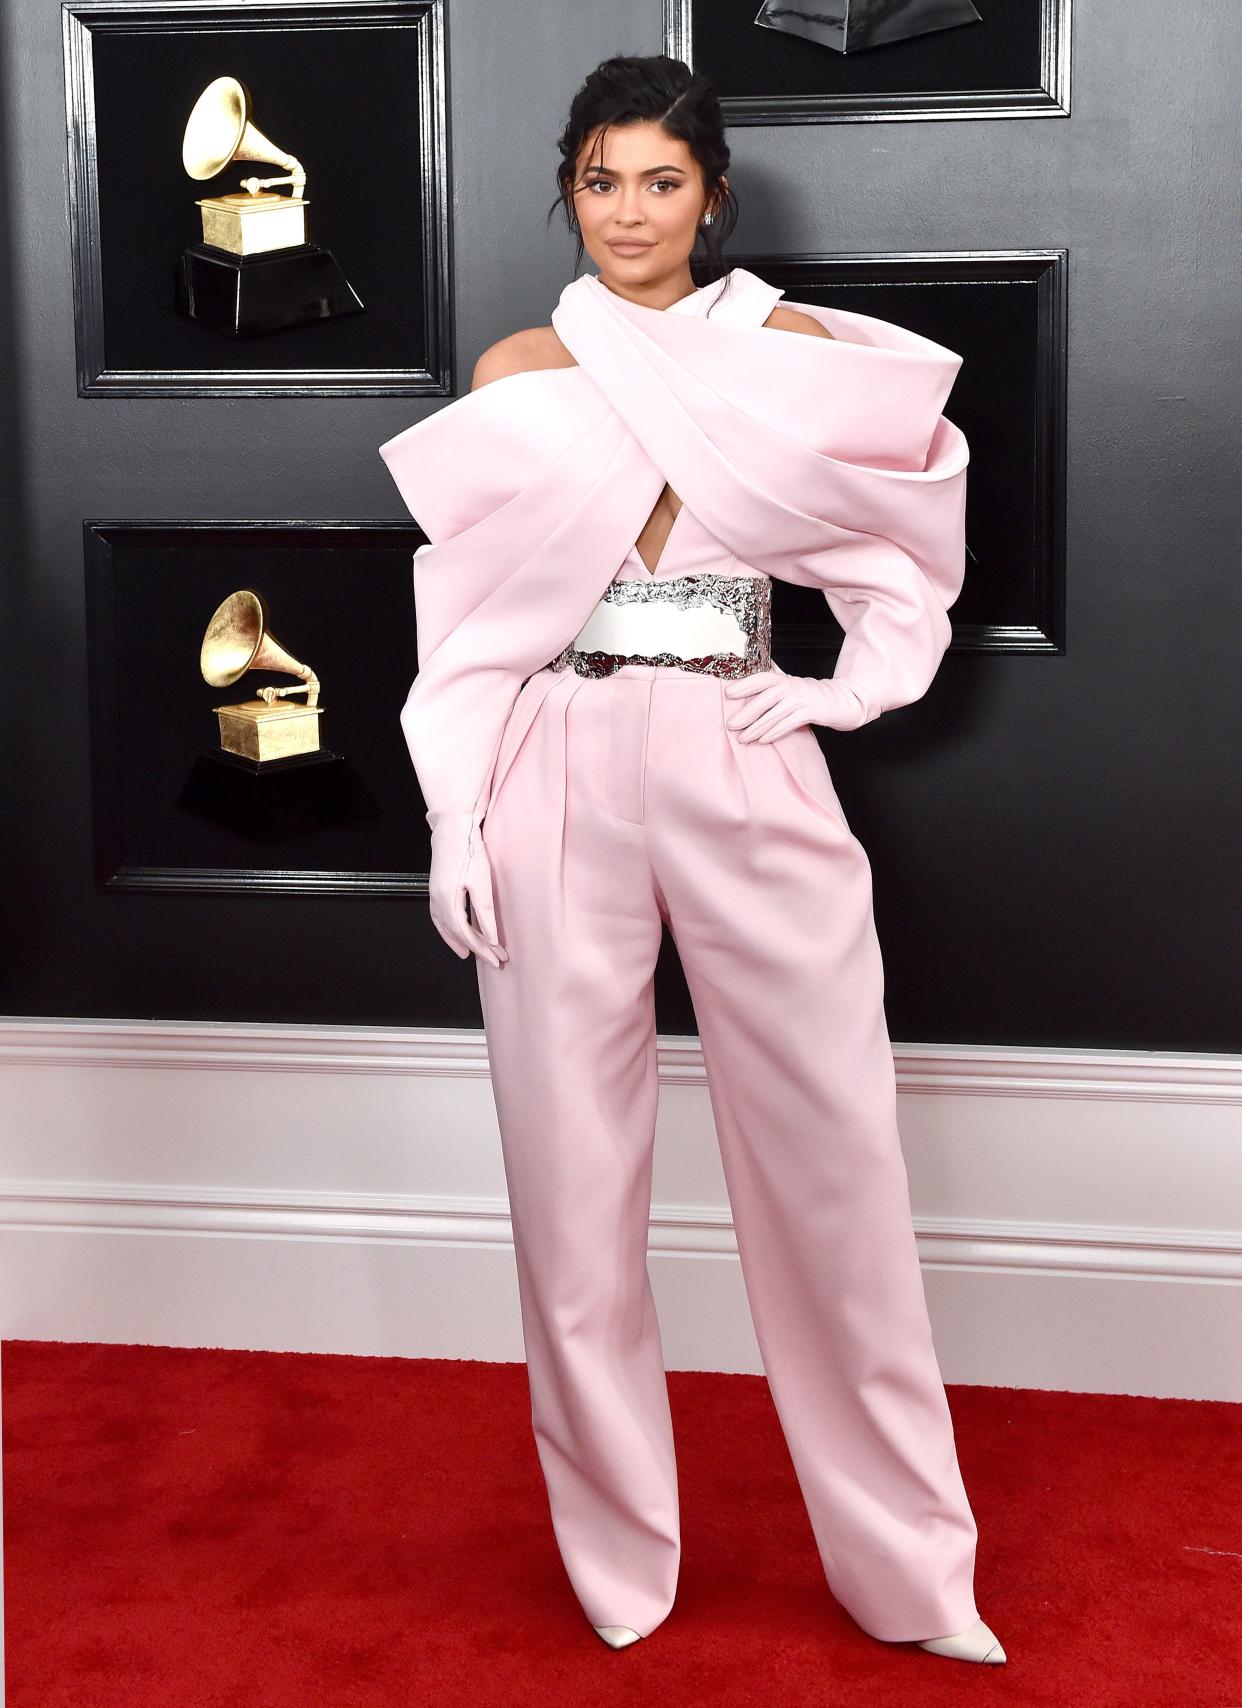 Kylie Jenner on the red carpet at the Grammys